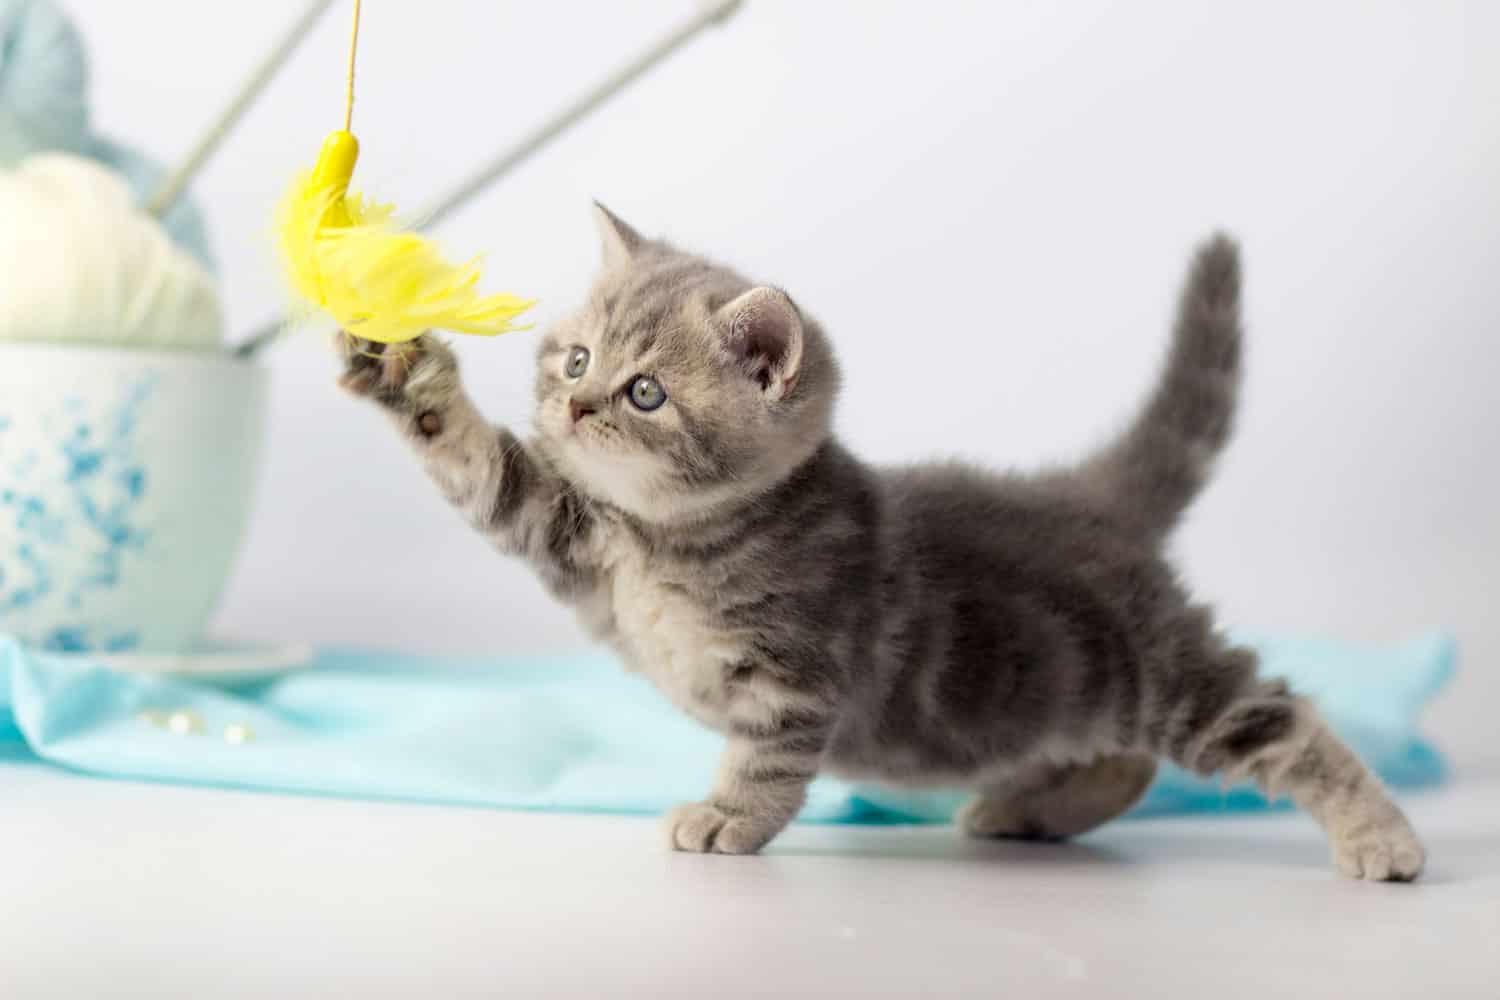 Kitten playing with yellow chasing toy